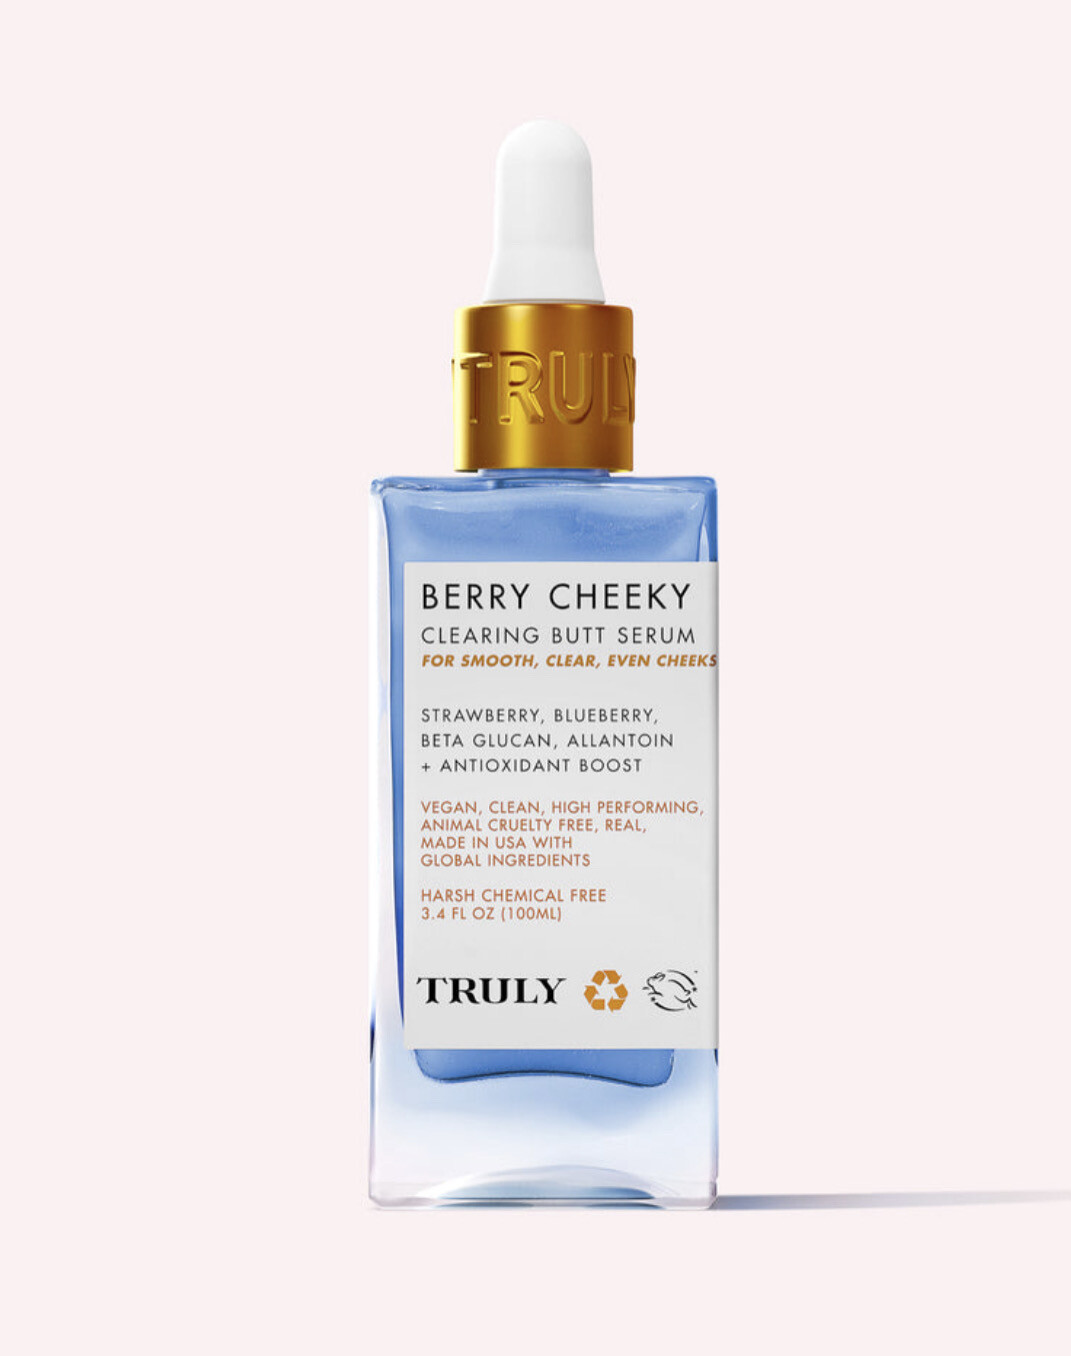 TRULY - Berry Cheeky Clearing Butt Serum